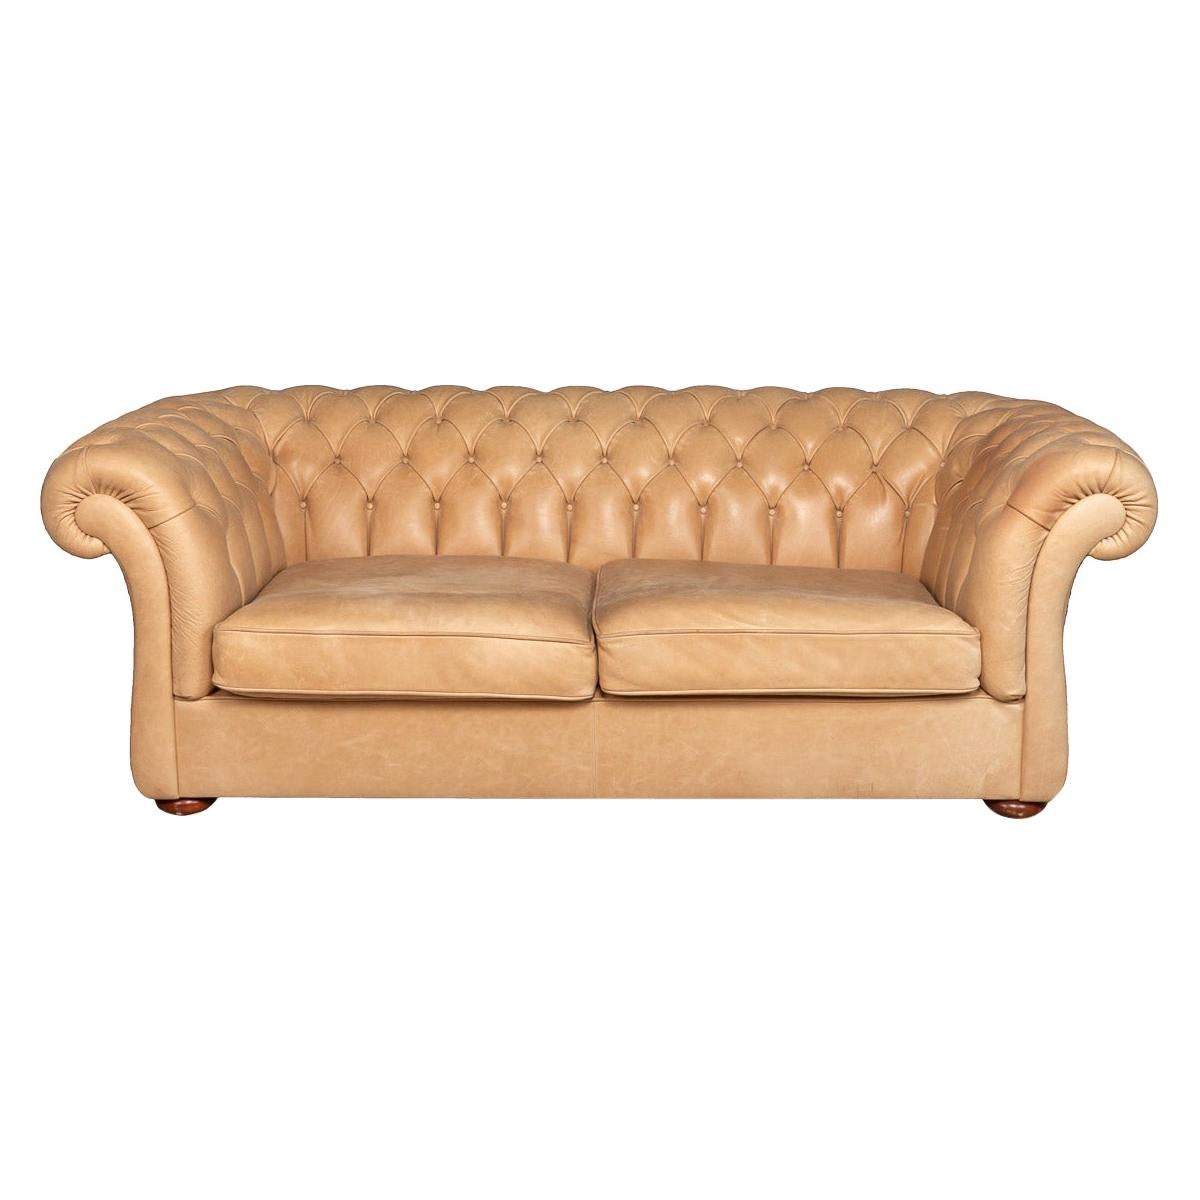 Modern 21st Century Handmade Chesterfield Sofa in White Leather For Sale